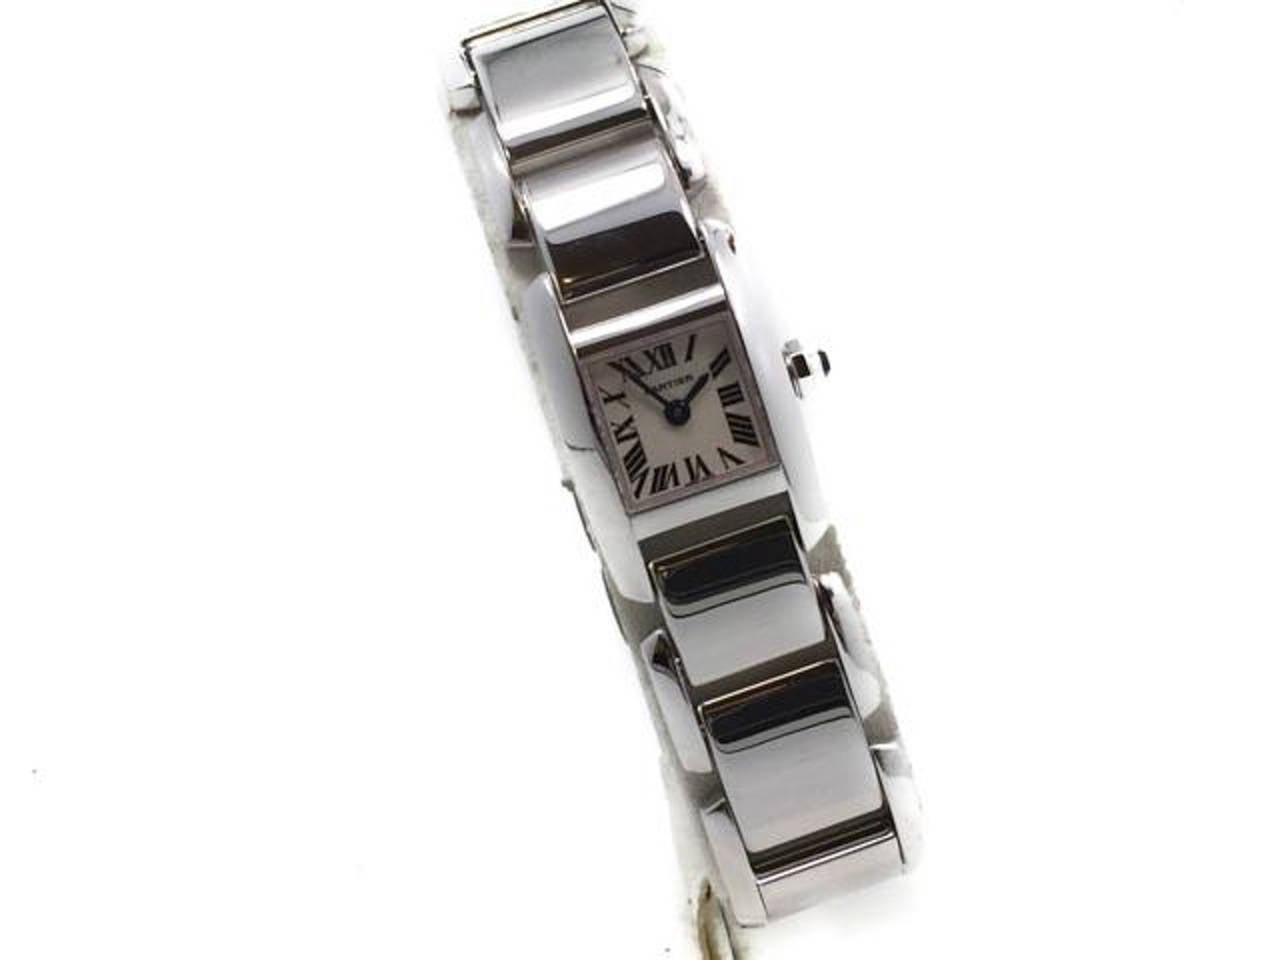 New Old Stock CARTIER Ladies (17mm) TANKISSIME 18KT WHITE GOLD MINI LADIES WATCH, Ref W650029H, Retails $14,500. Included with the Watch are its Inner & Outer Box, Manual & Blank Cert.